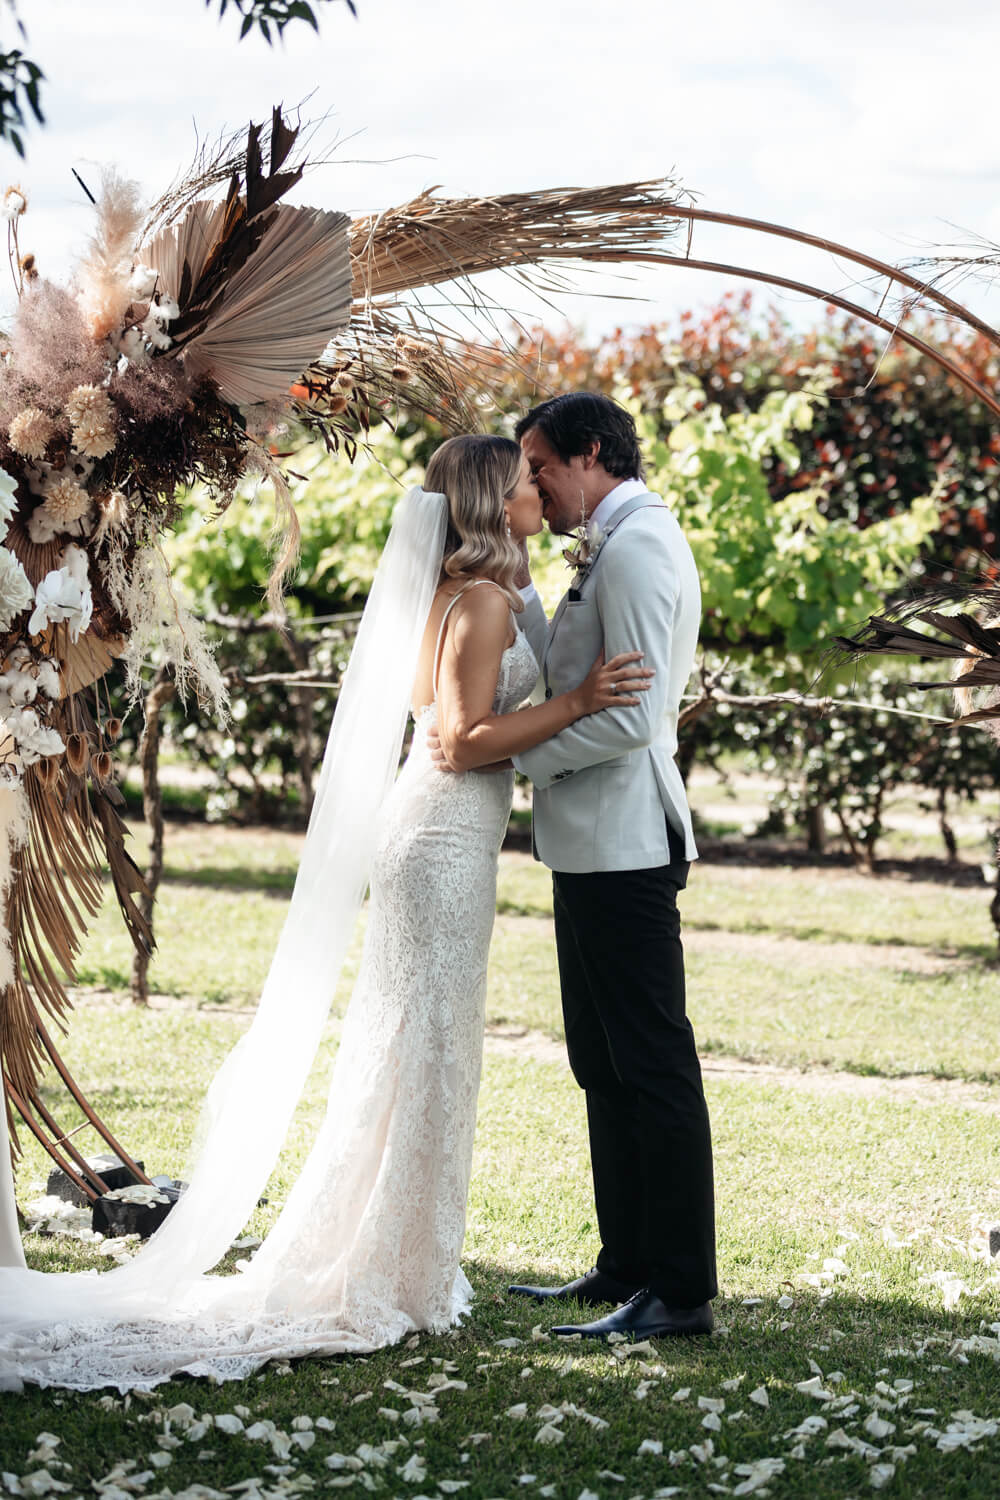 Courtney and jake share their first kiss at their Blue Wren Mudgee Wedding